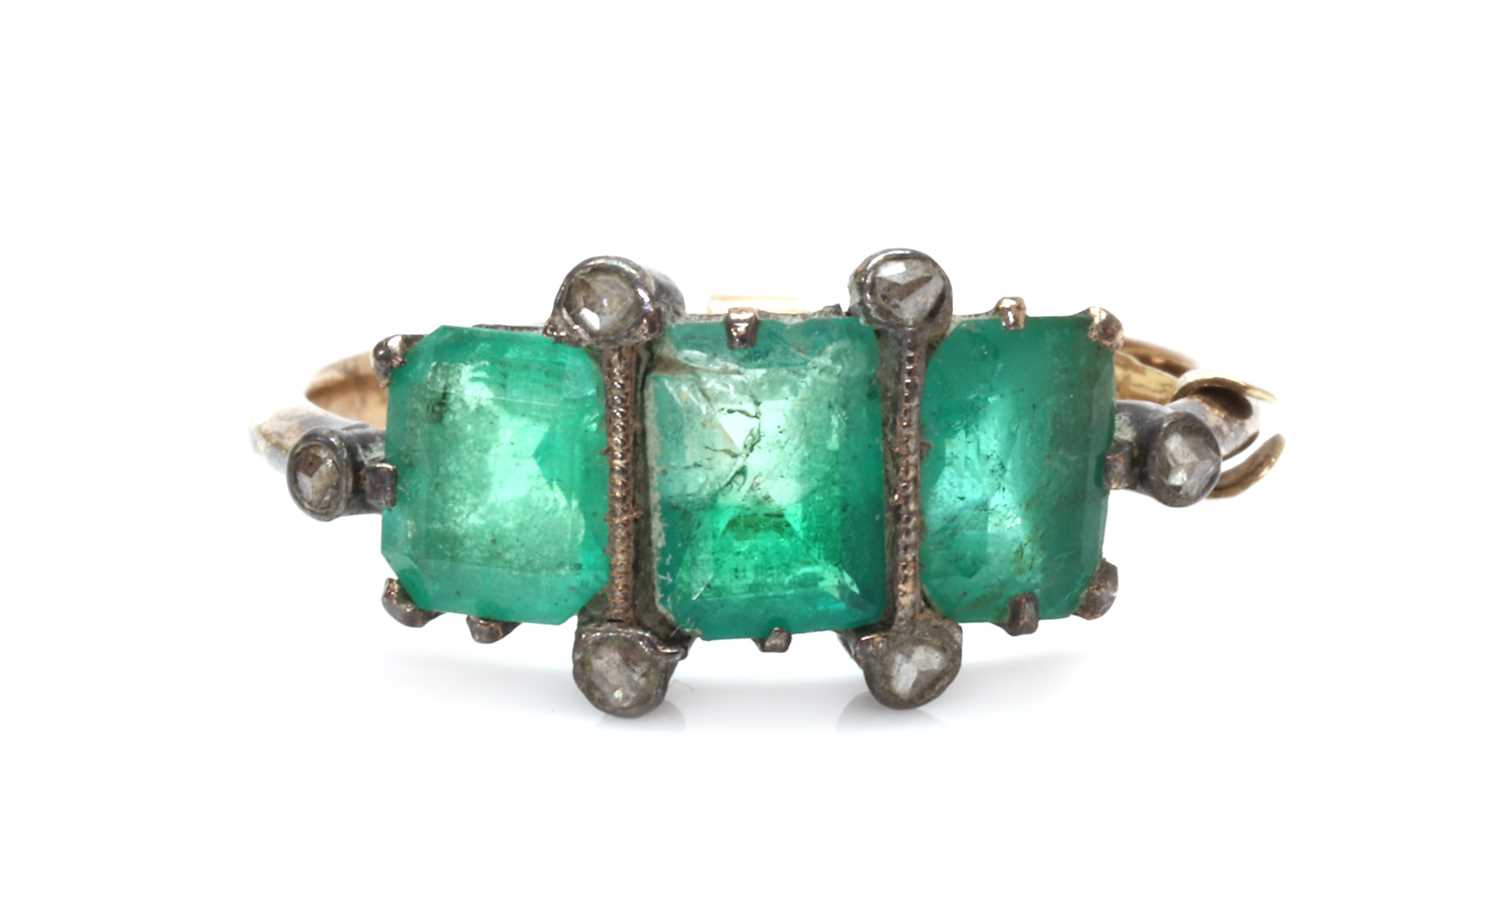 Lot 1016 - A gold and silver, emerald and diamond ring